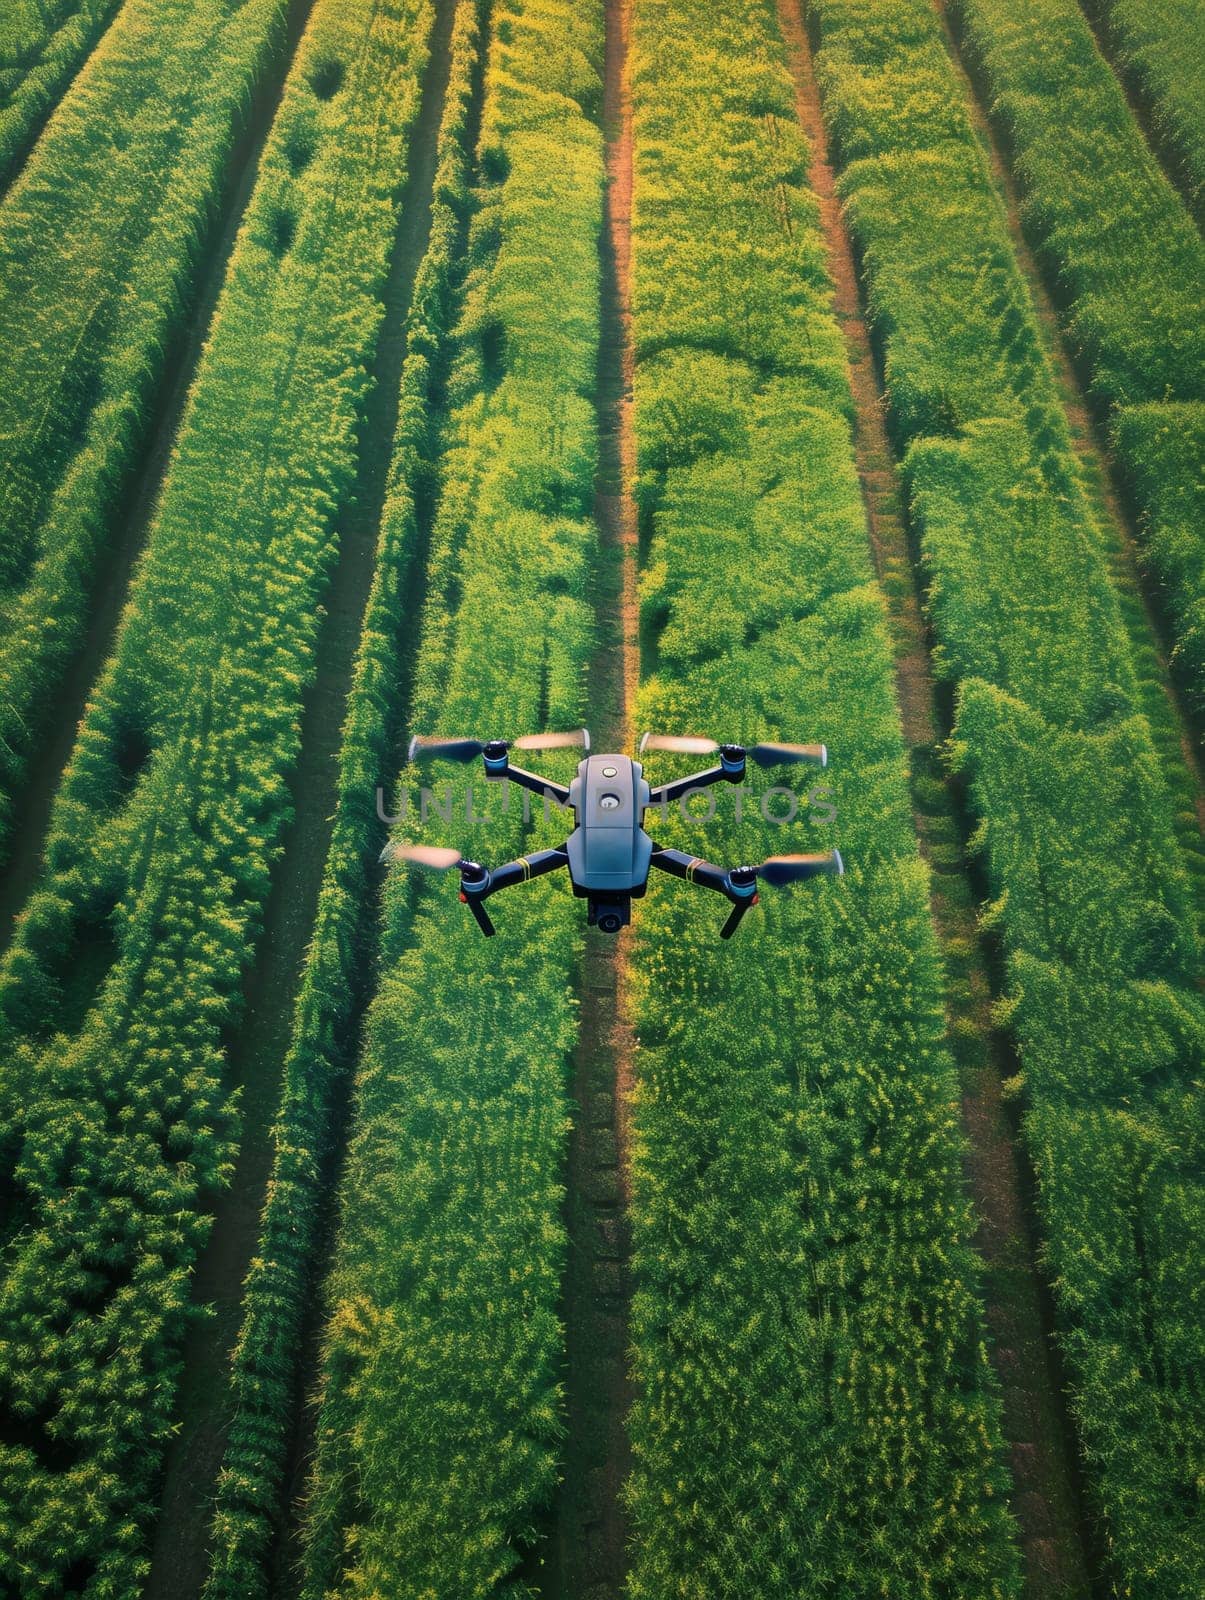 A drone surveys the lush, sunlit crop fields, capturing the essence of modern agriculture and effective land management. Organized rows exemplify careful cultivation and farming efficiency